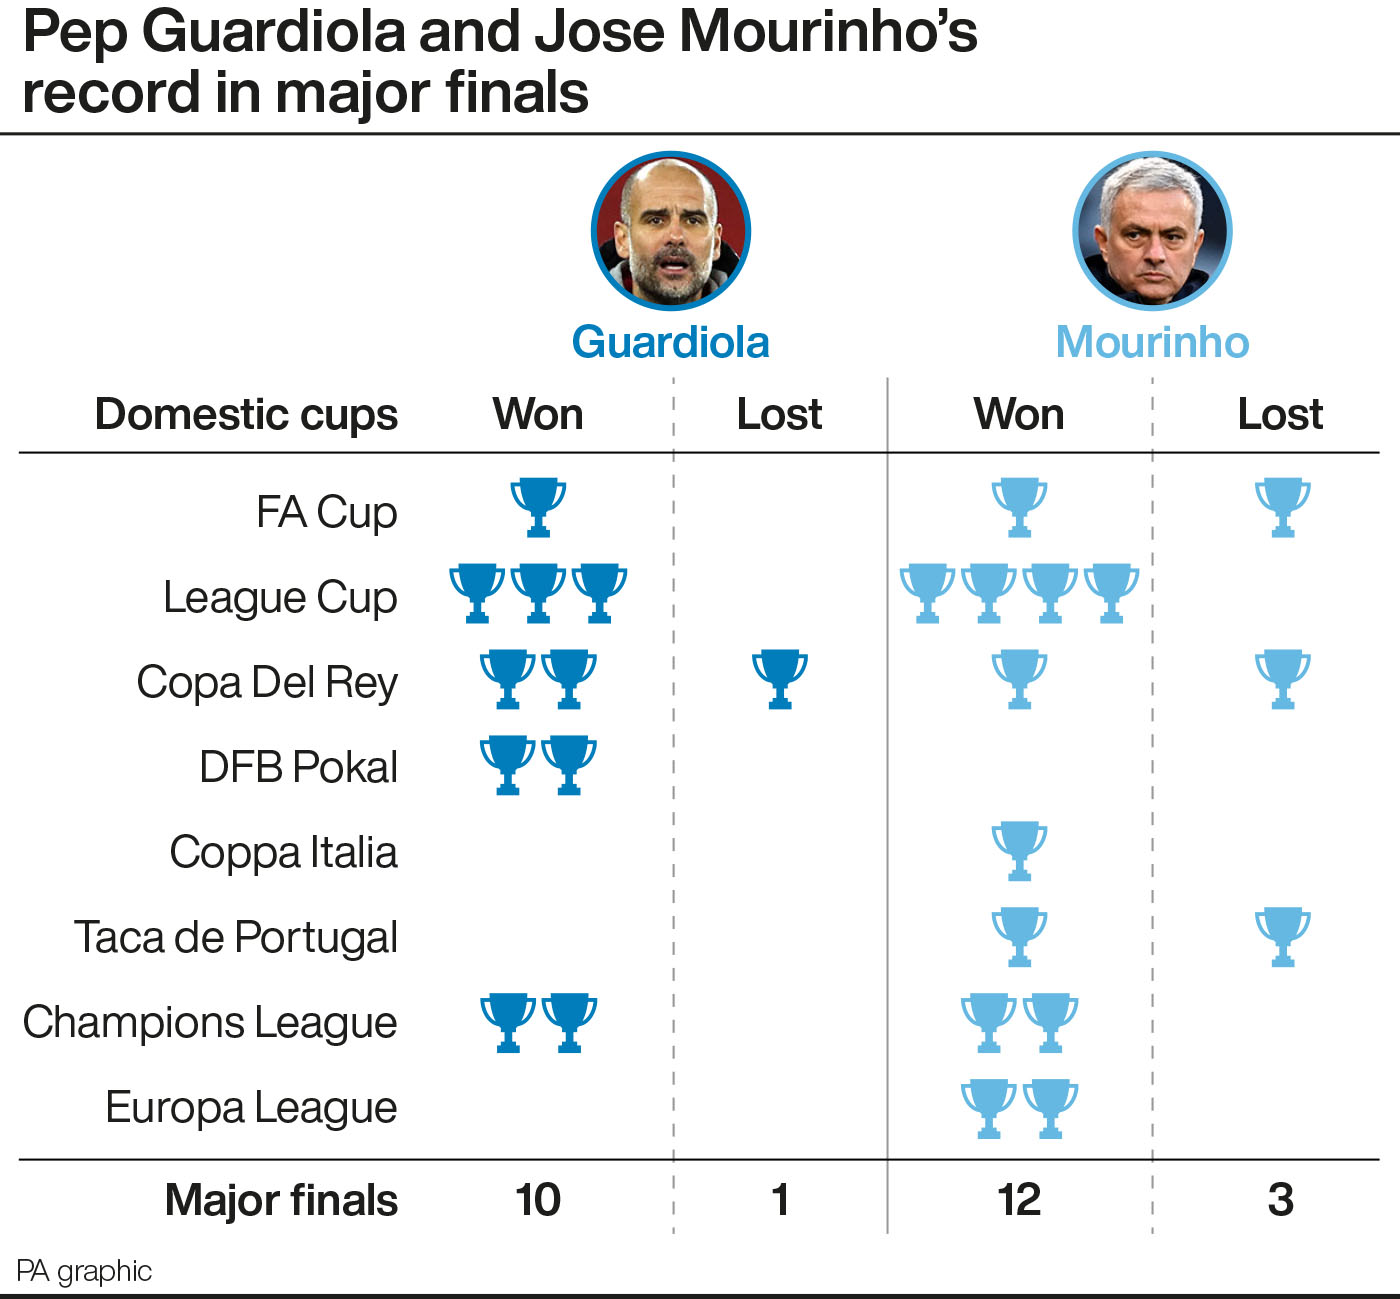 Pep Guardiola and Jose Mourinho's record in major finals